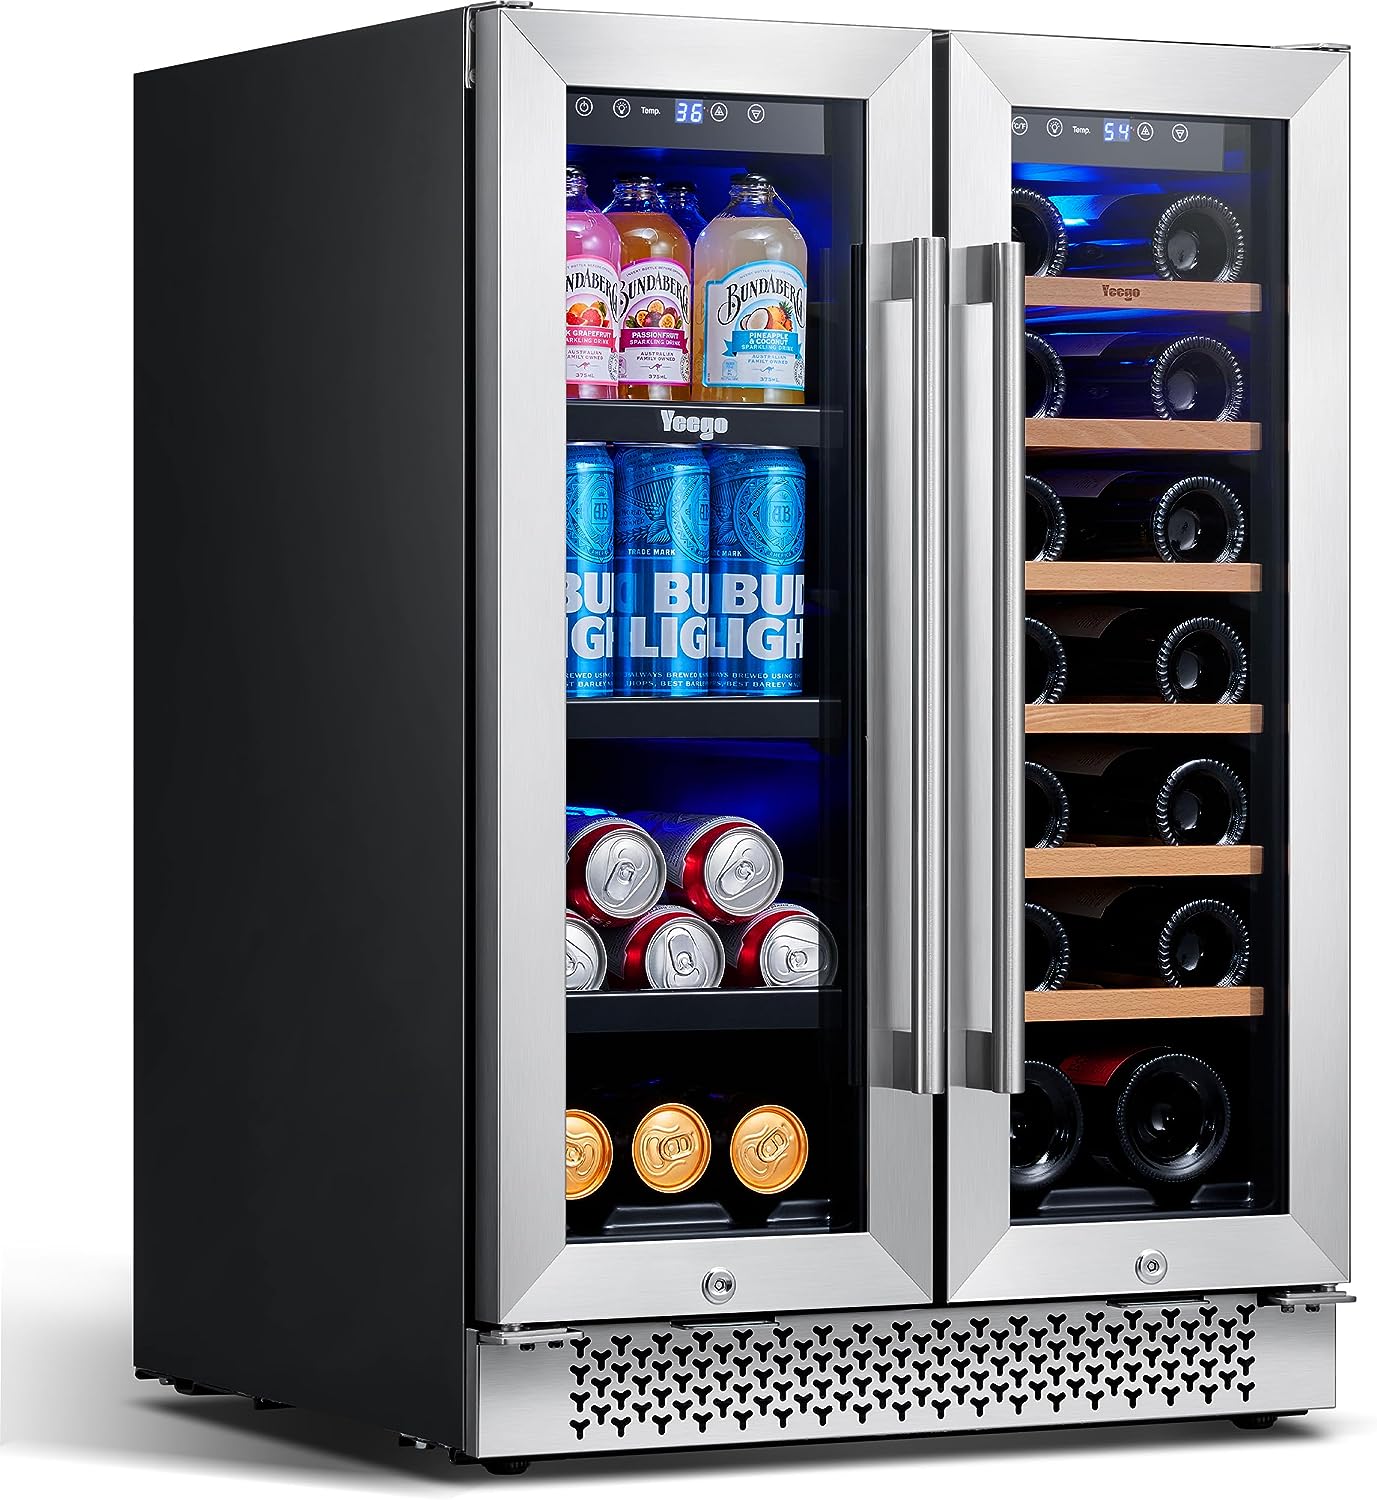 dison mini fridge cooler, dison mini fridge cooler Suppliers and  Manufacturers at